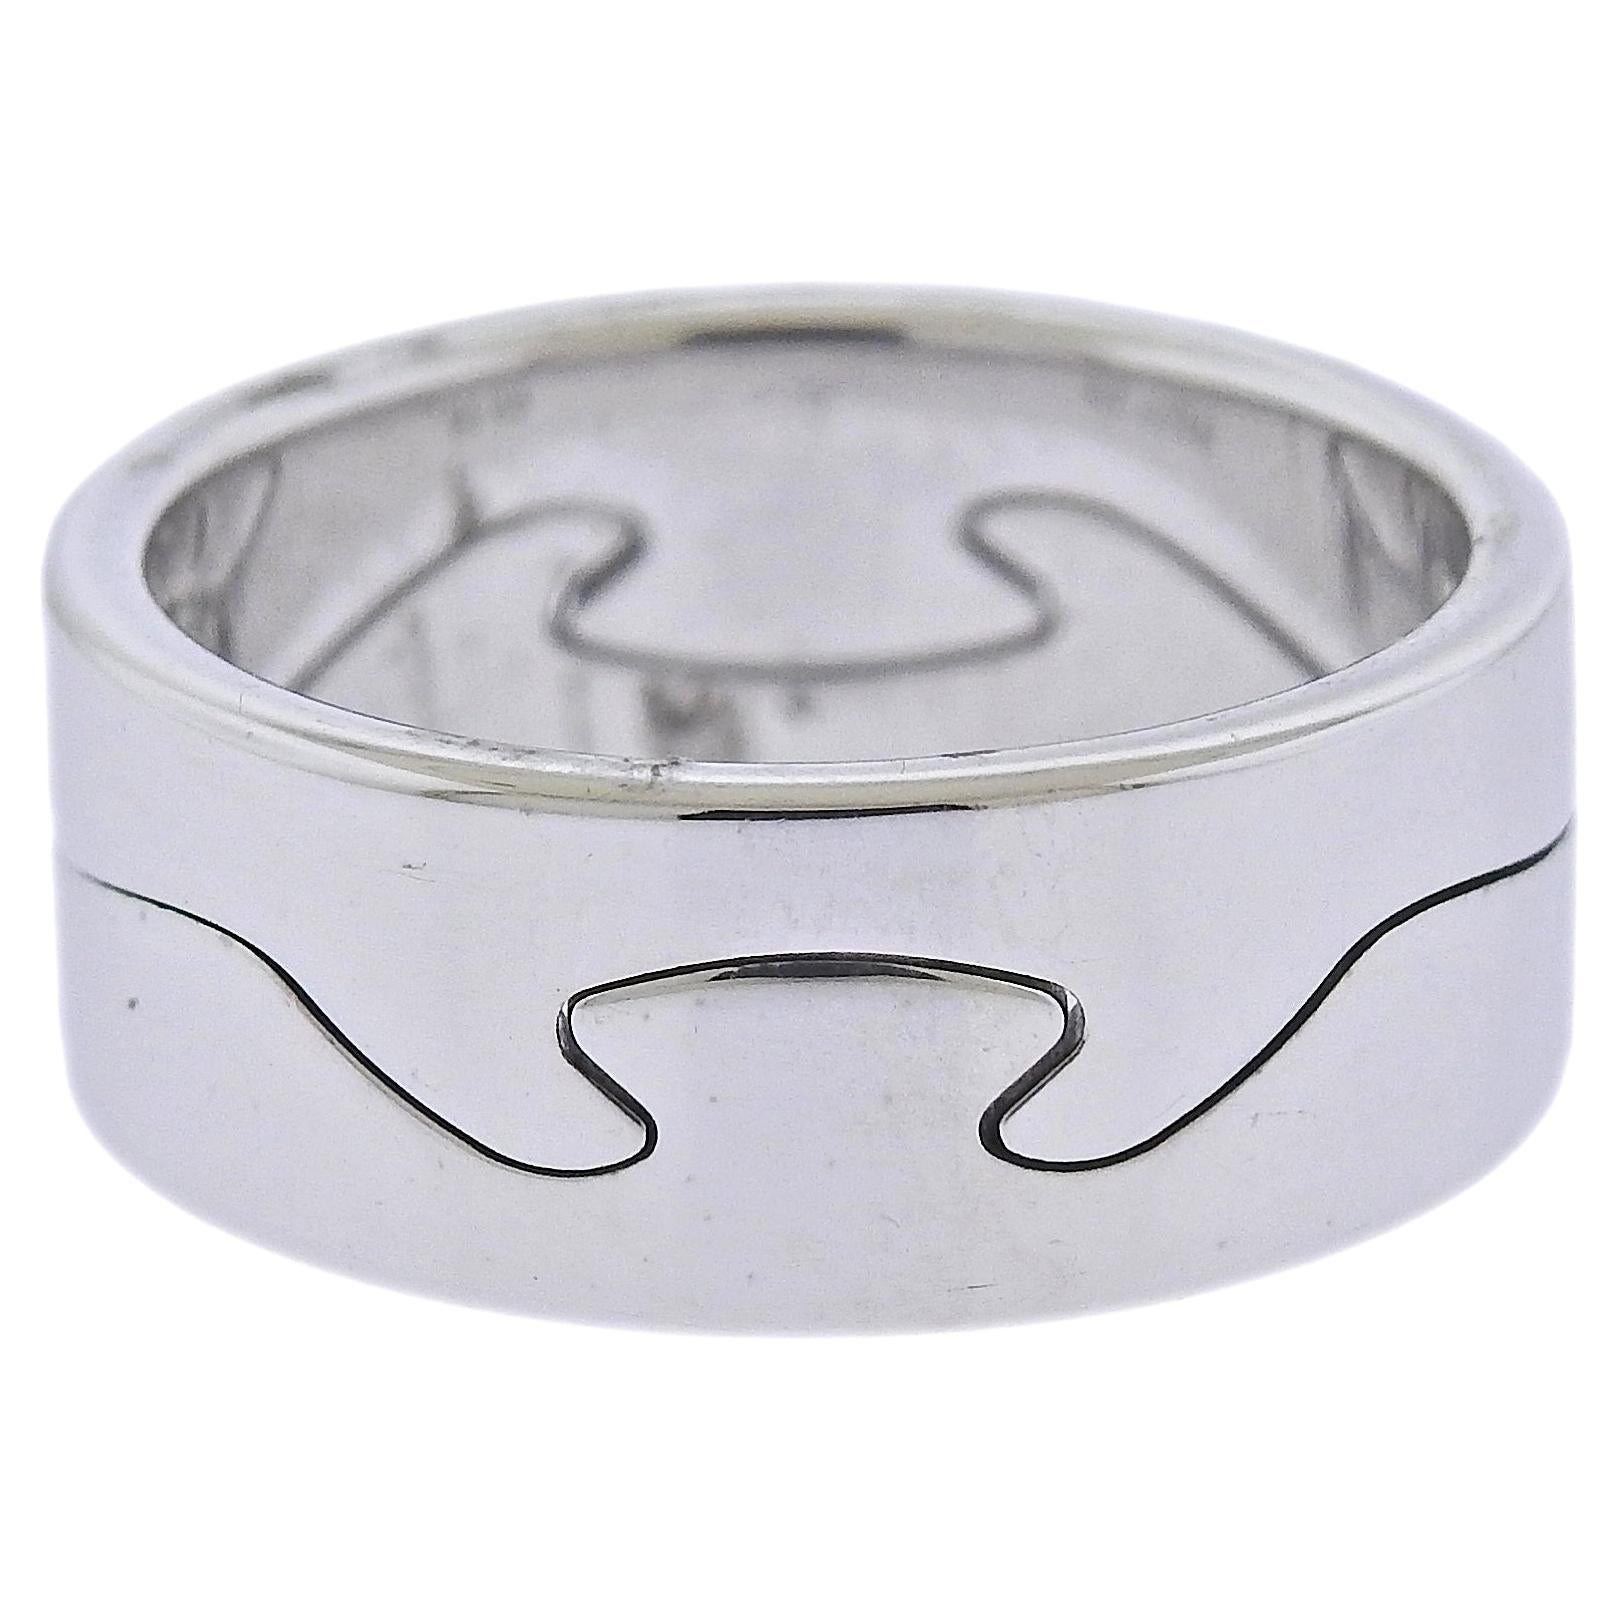 Georg Jensen Fusion Ring - 13 For Sale on 1stDibs | georg jensen fusion ring  second hand, georg jensen fusion ring sale, georg jensen fusion rings